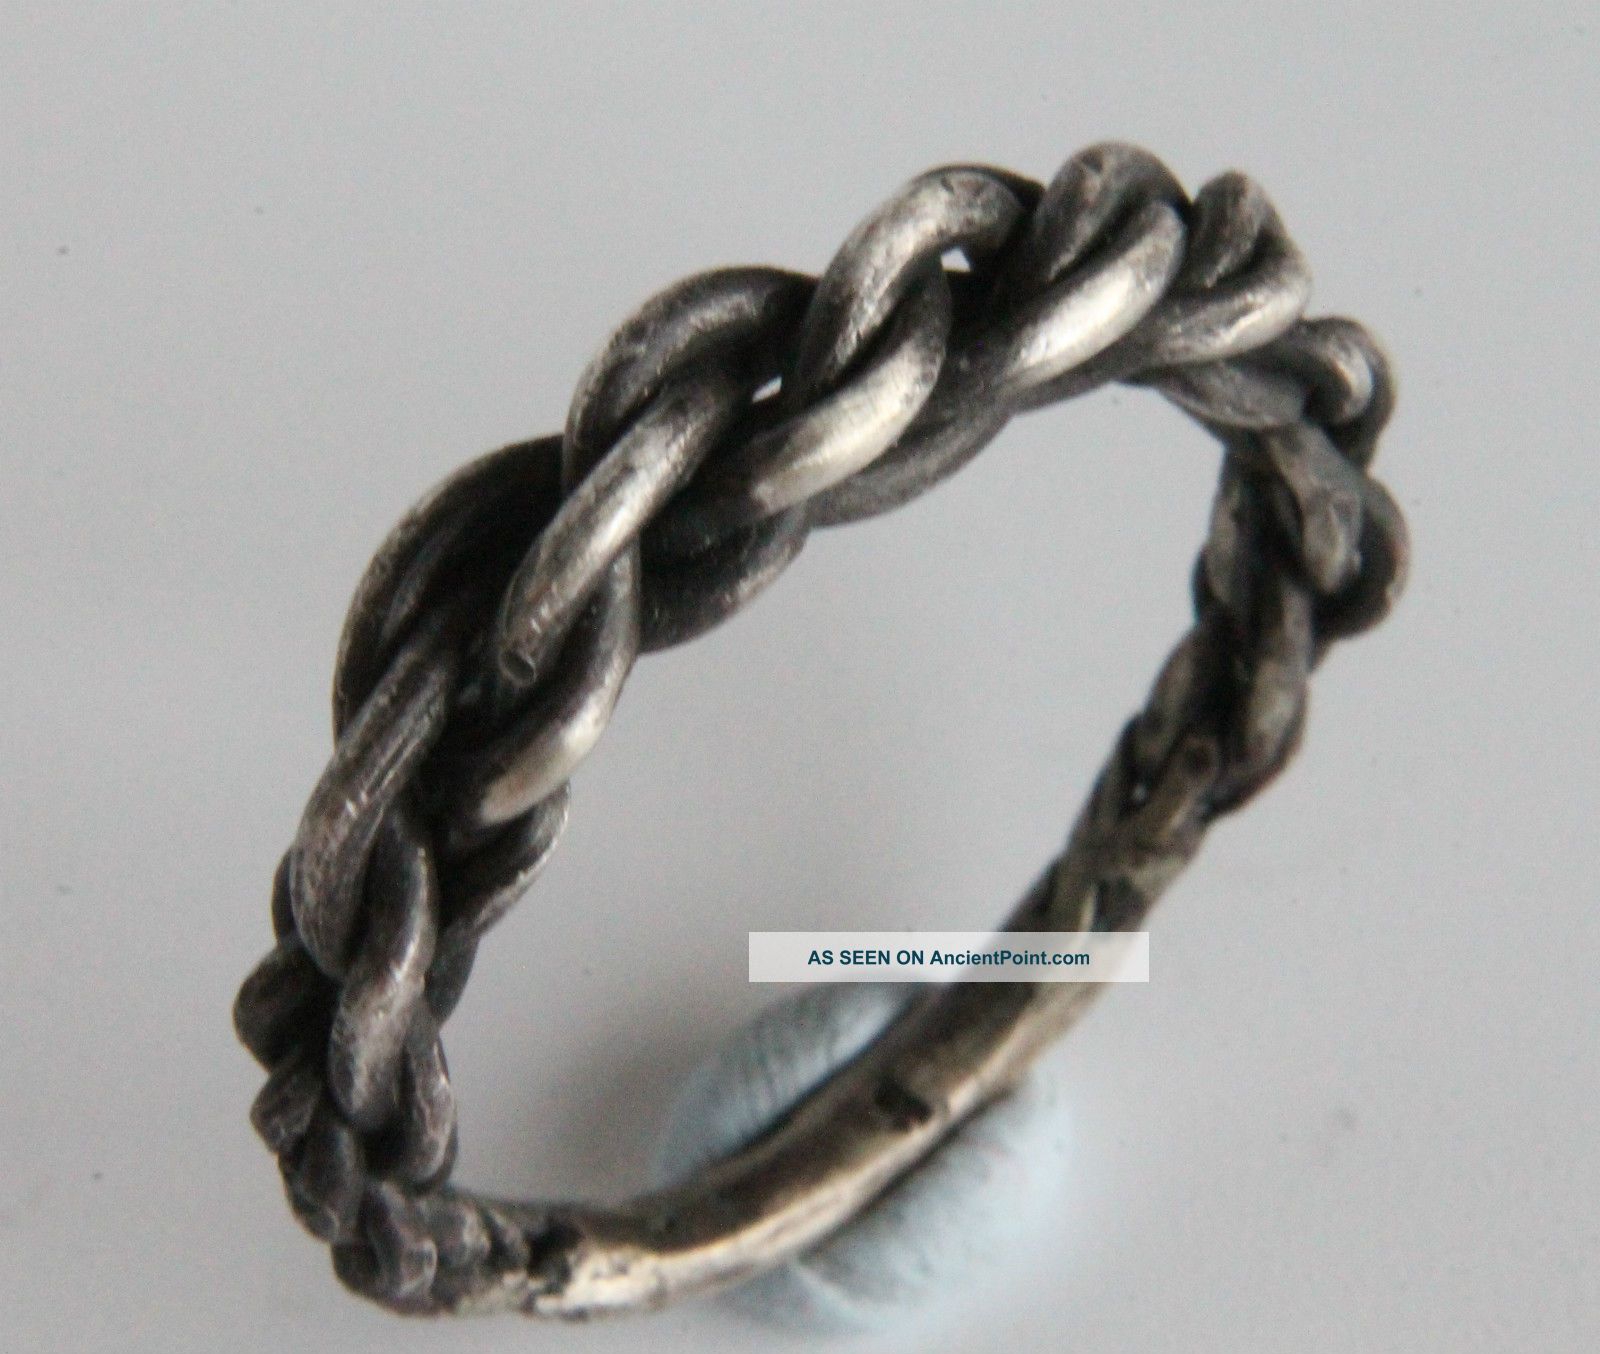 Ancient Viking Period Twisted Silver Knotted Ring Scandinavian Jewelry 1100 Ad Scandinavian photo